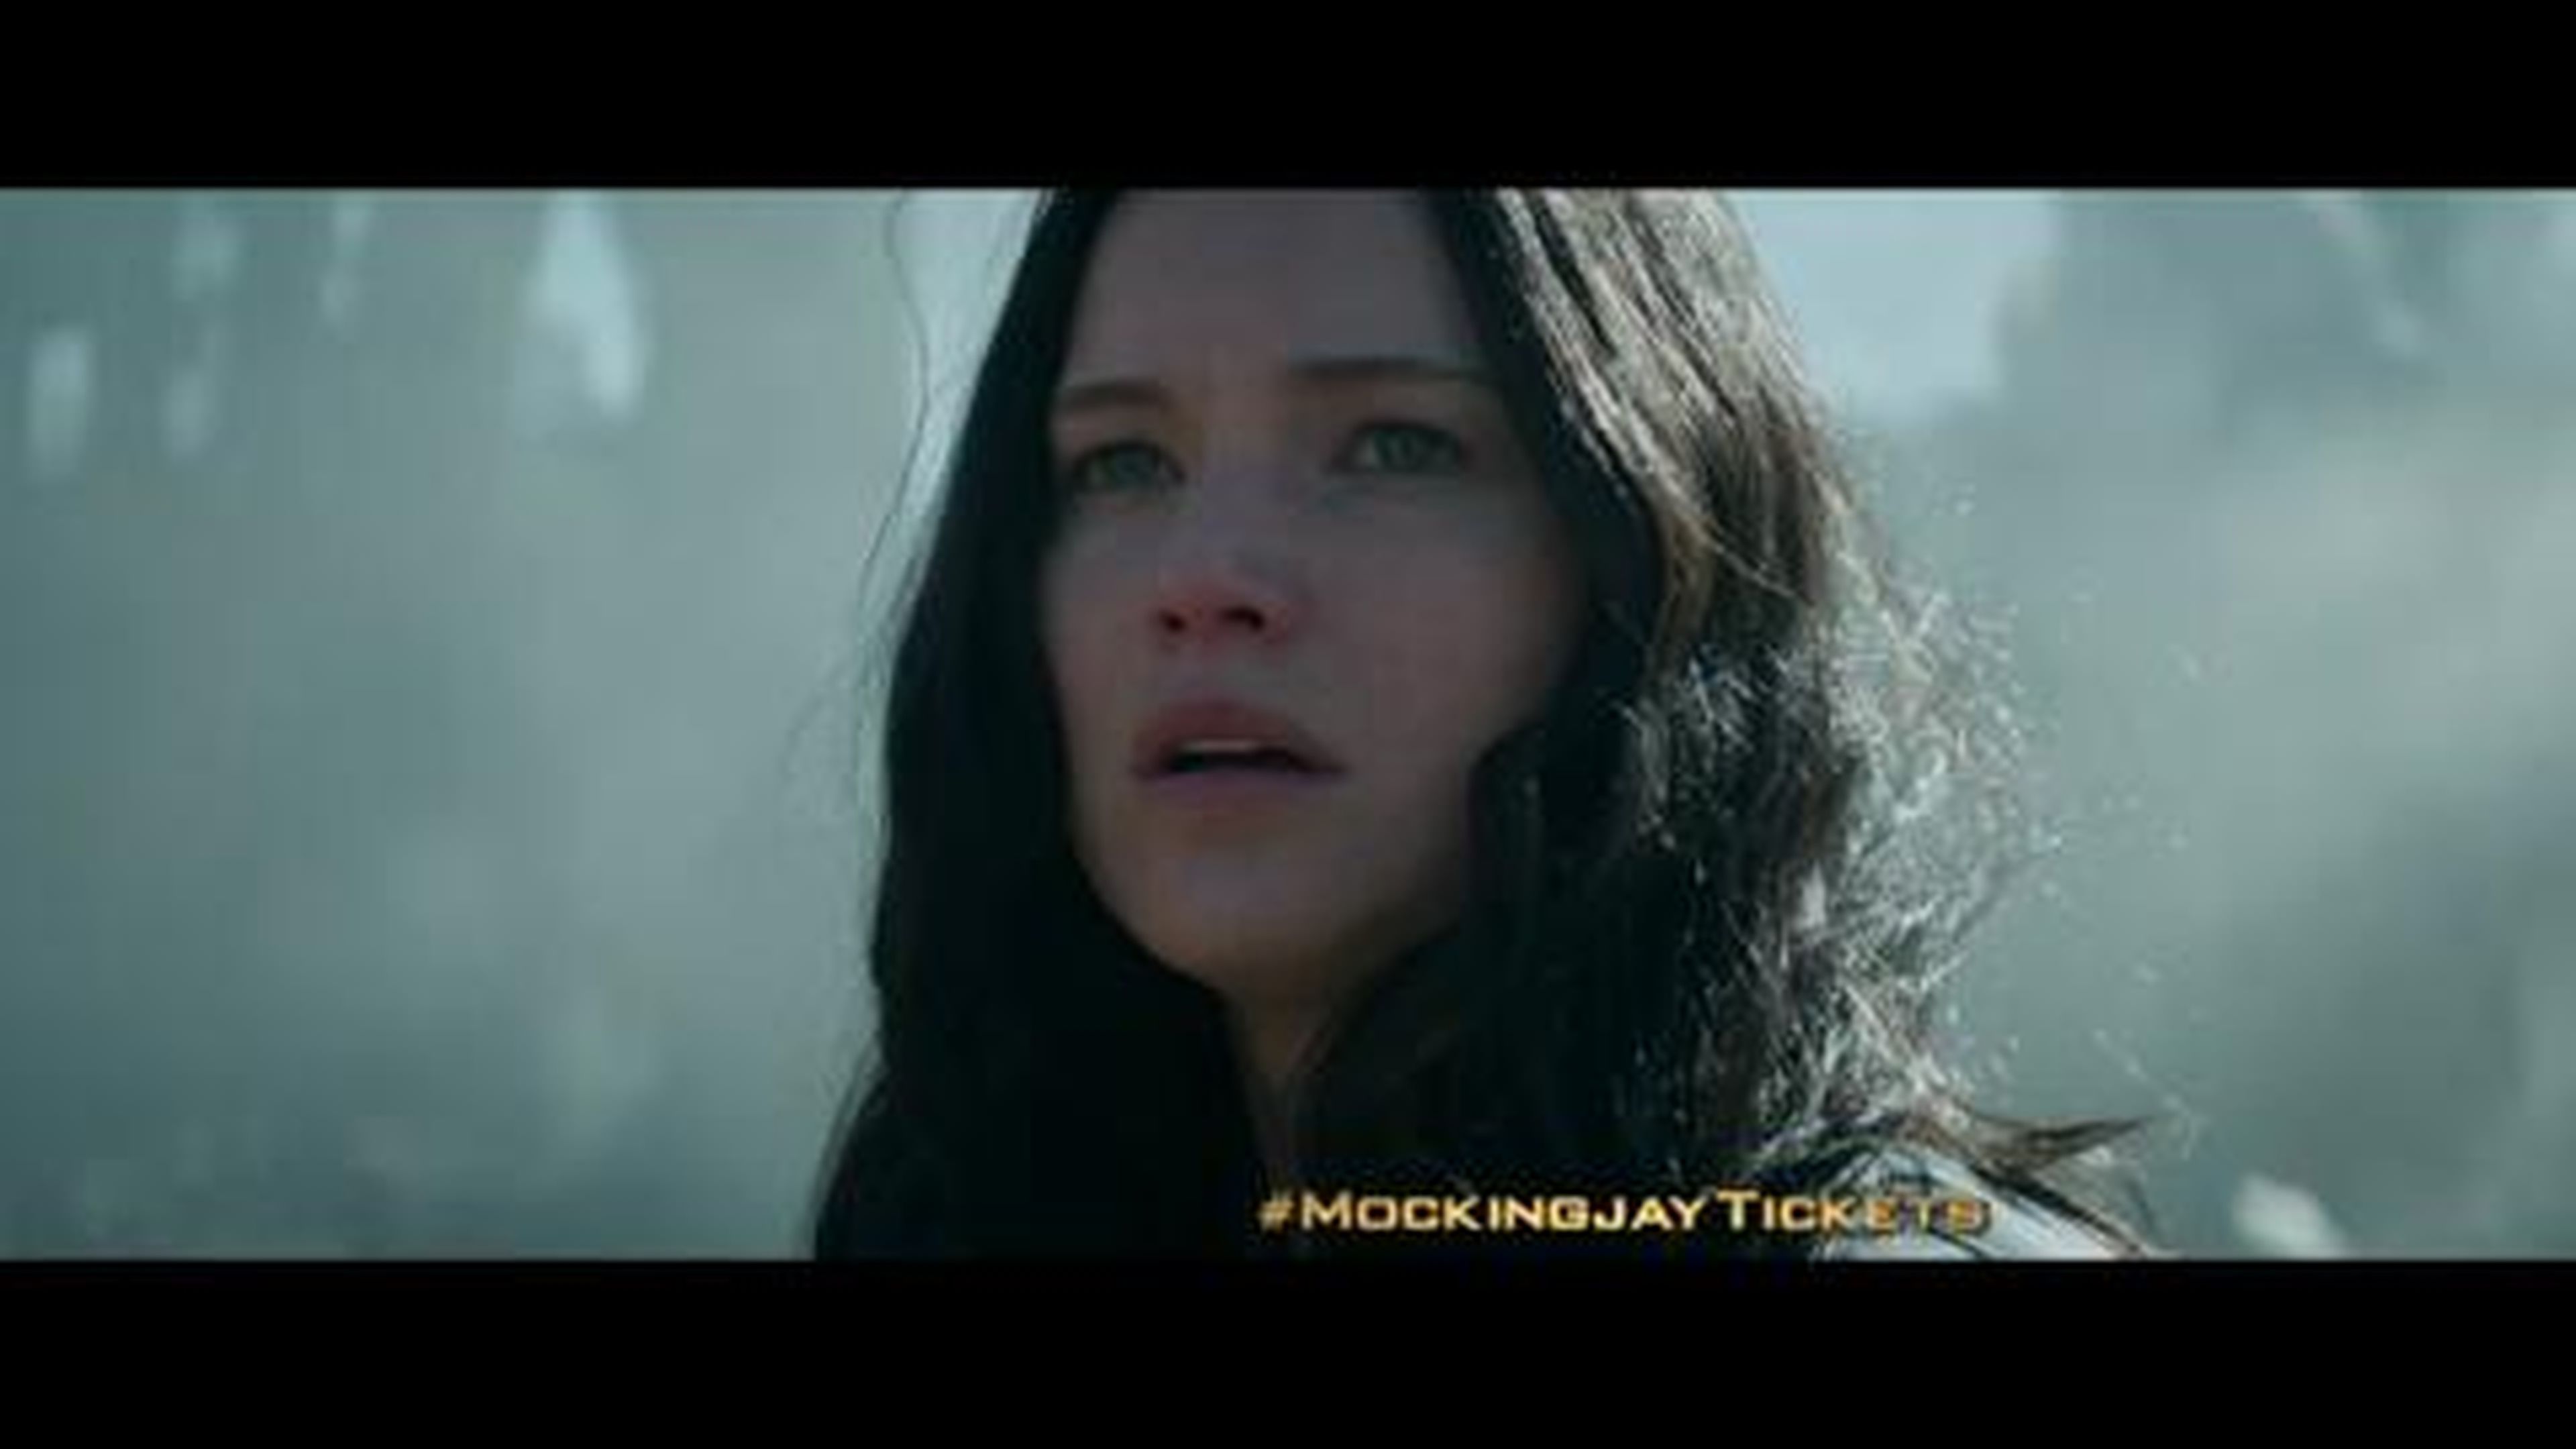 The Hunger Games: Mockingjay Part 1 - “Return to District 12”